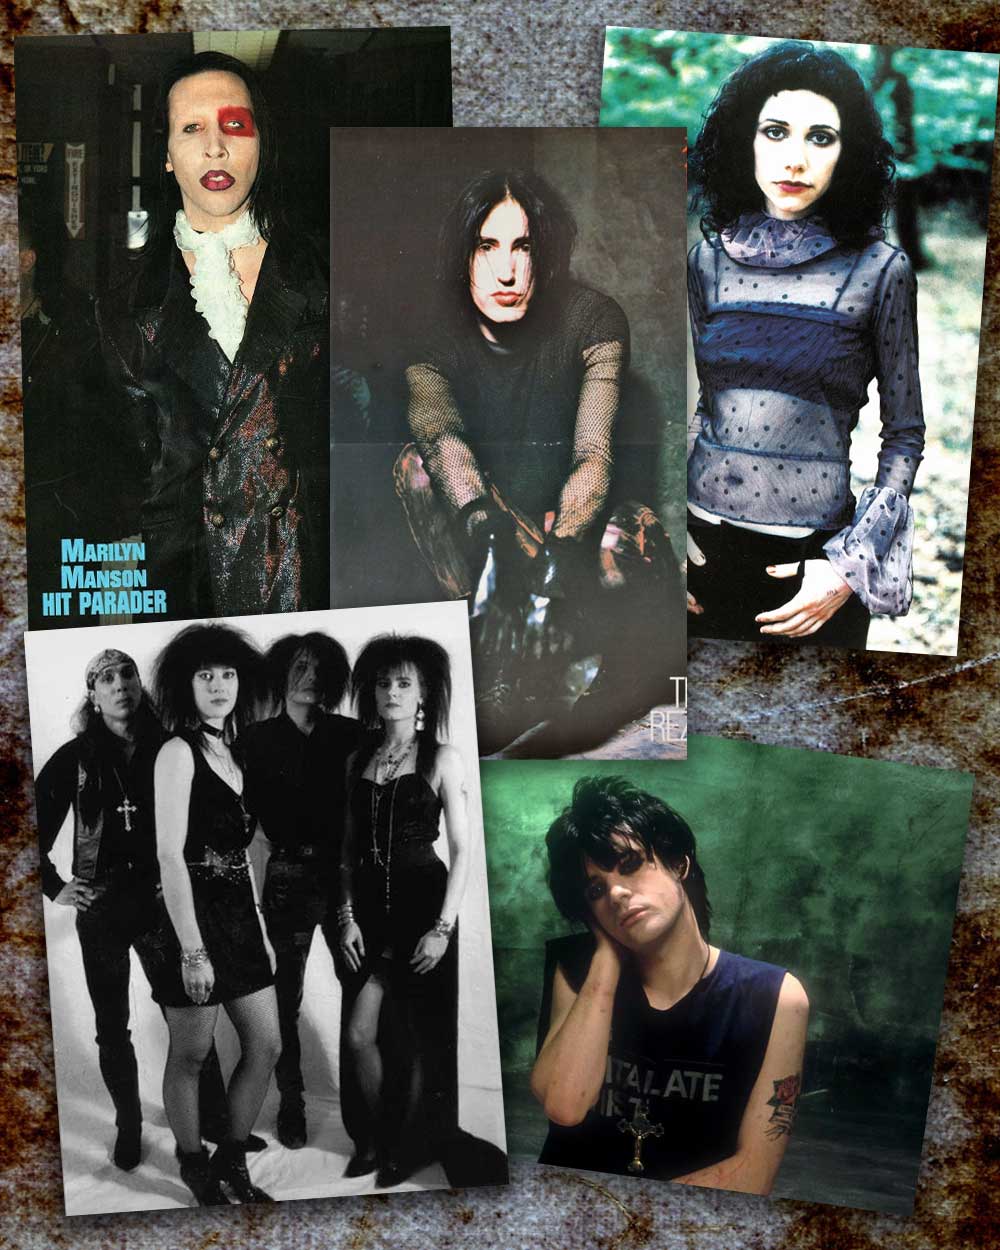 90s Gothic fashion style inspired by Music bands such as Marilyn Manson, PJ Harvey, Manic Street Preachers, and Nine Inch Nails.